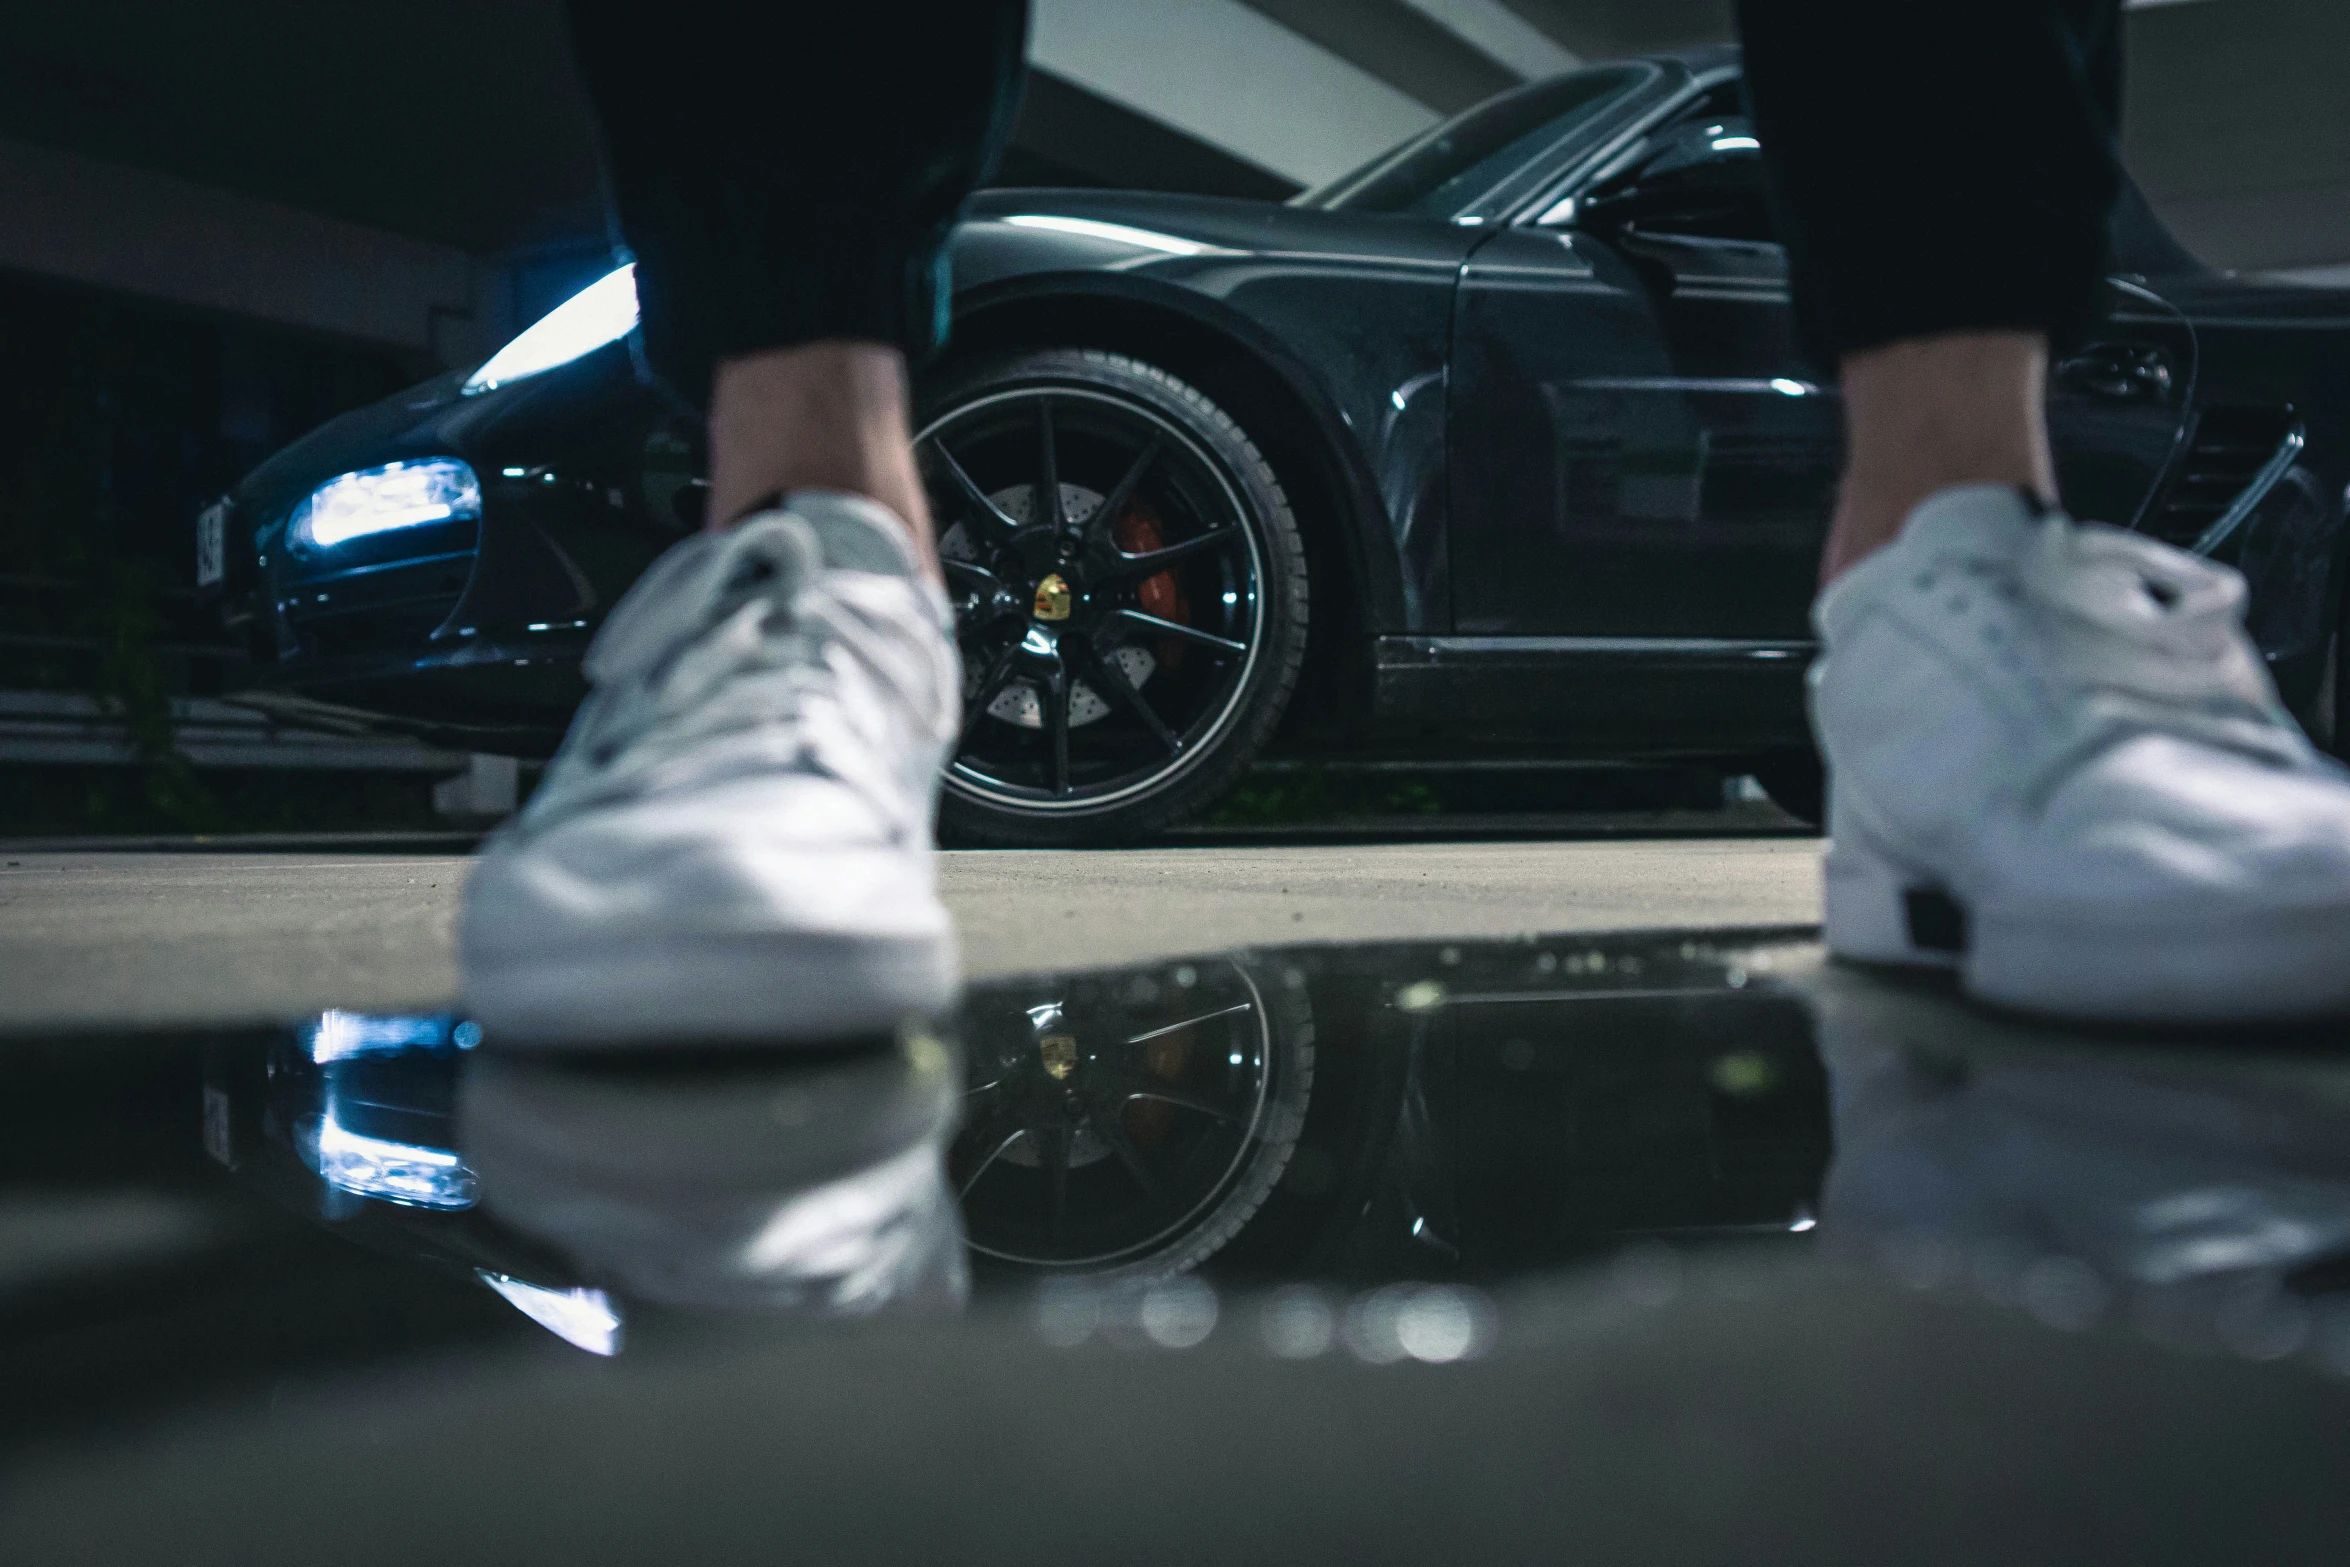 someones feet and ankles wearing white shoes near a black sports car